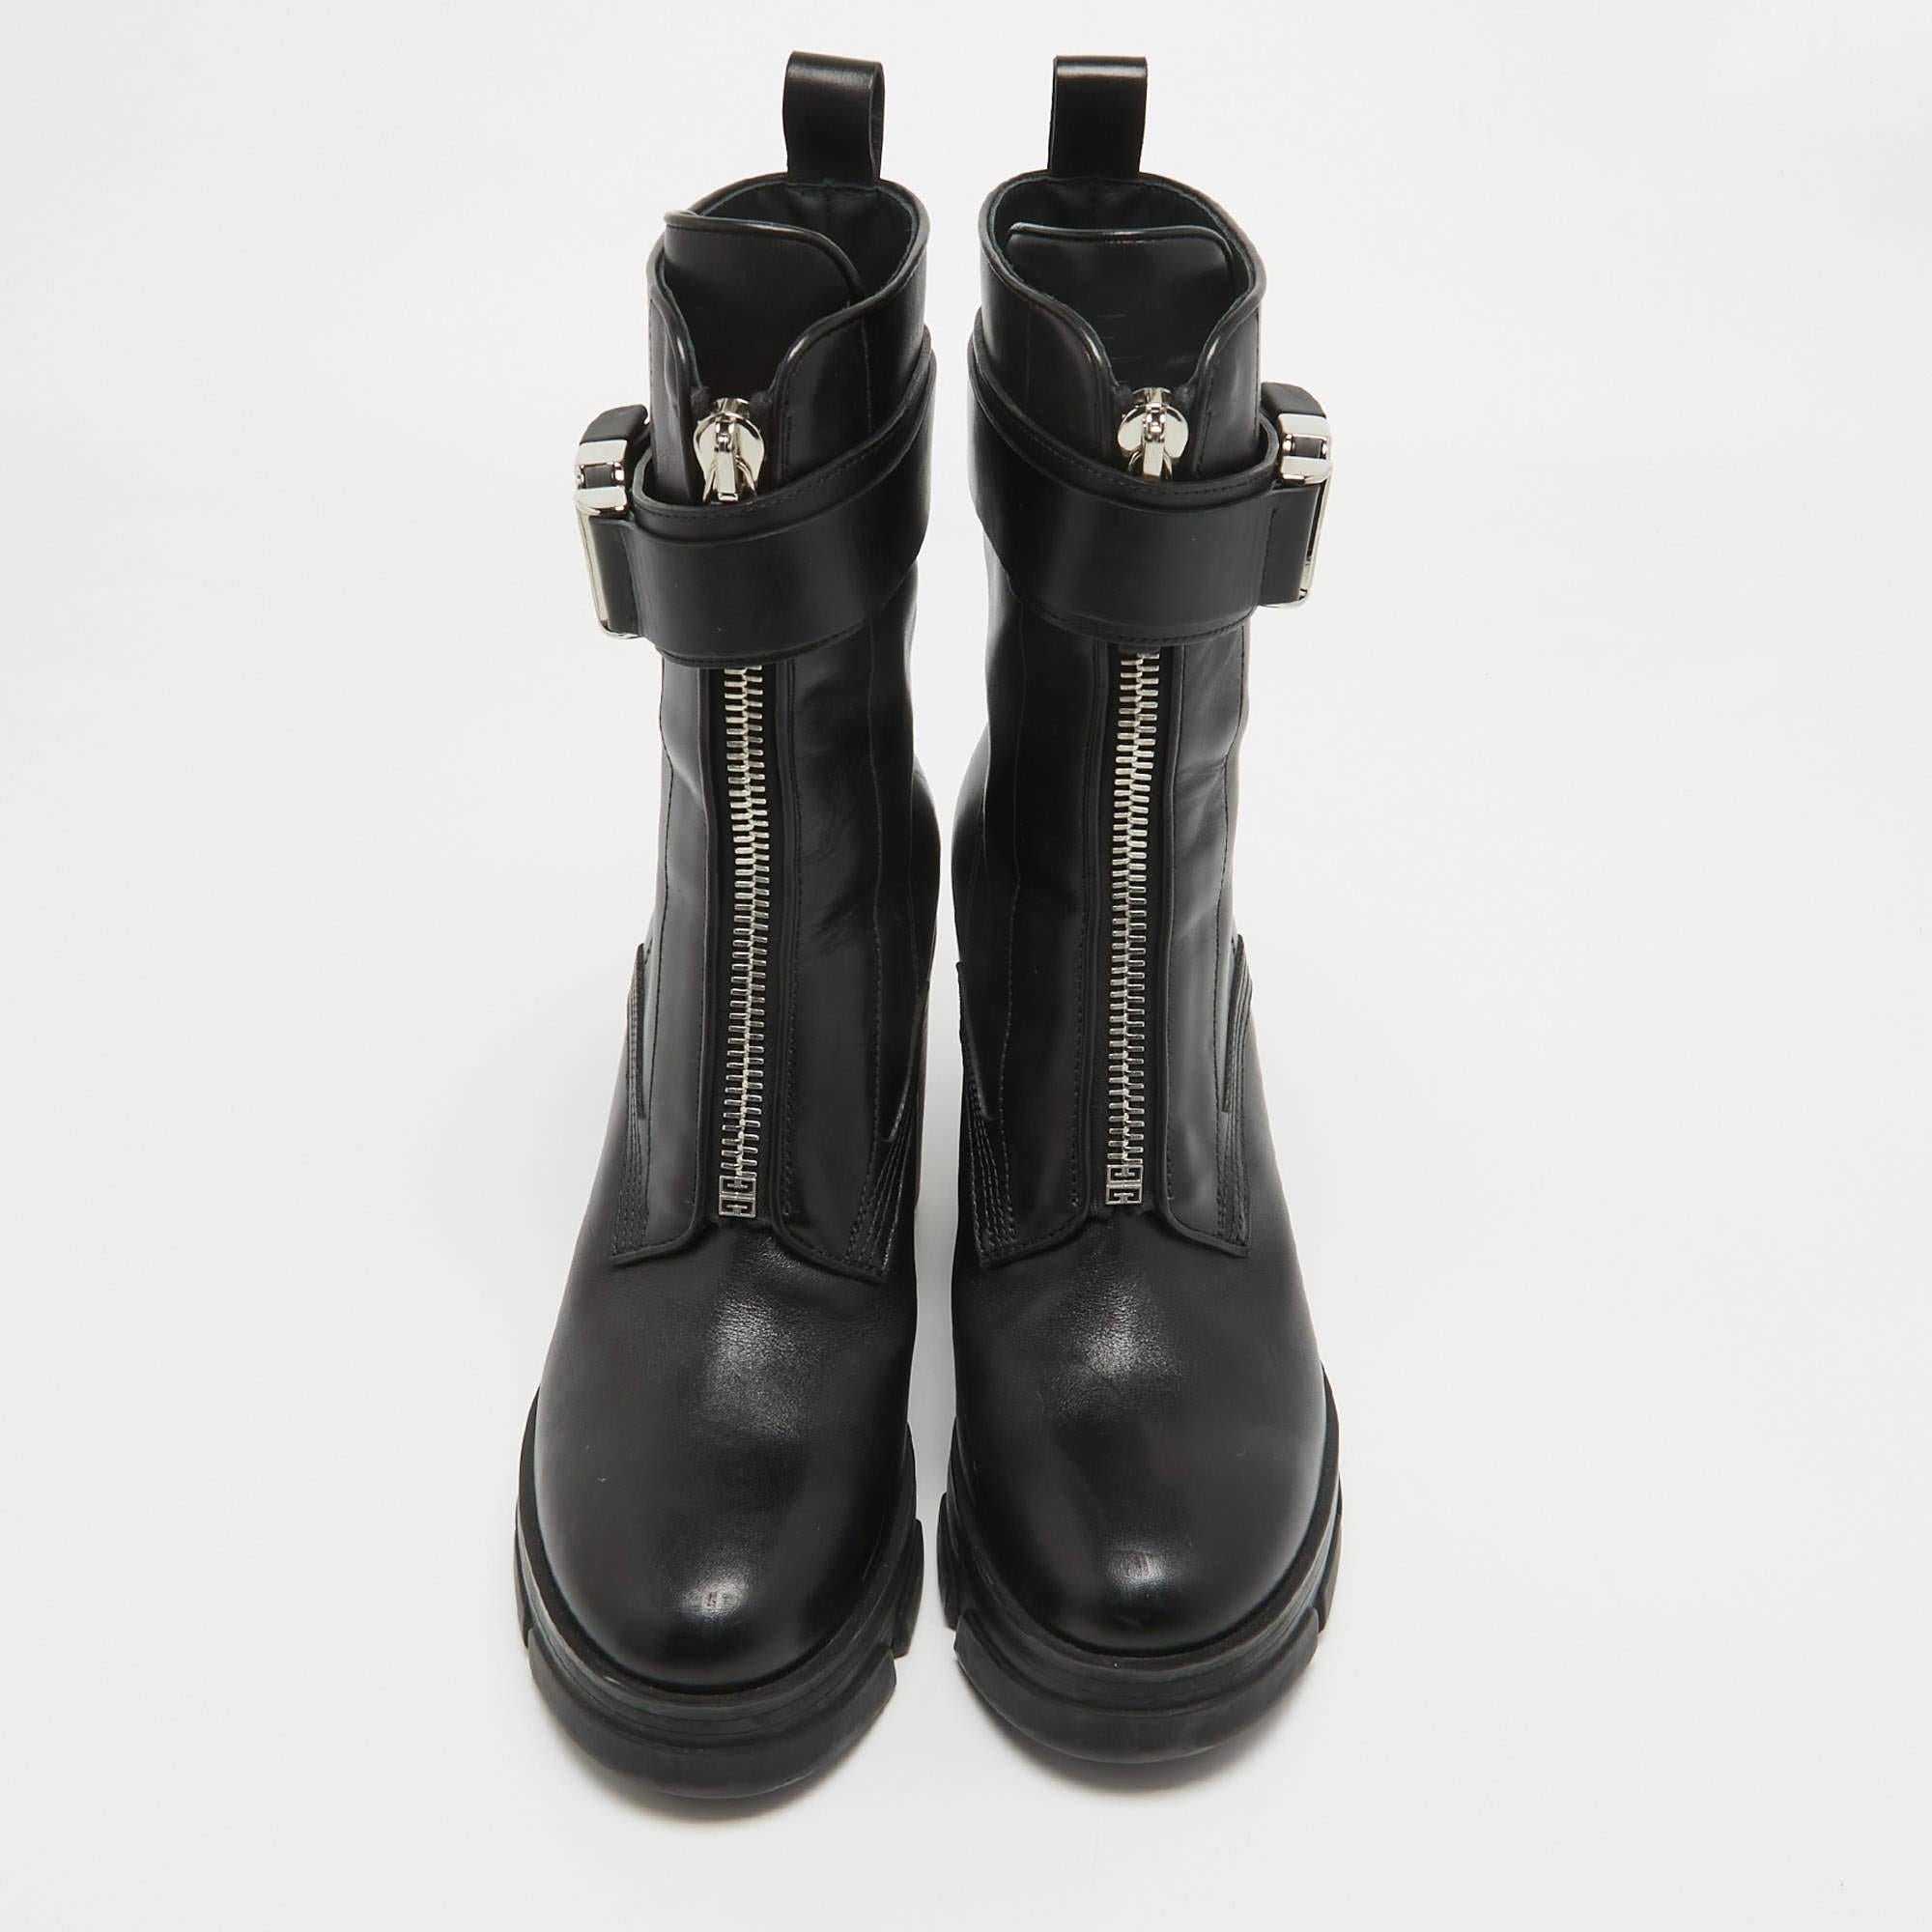 A sleek design amplified by skillful craftsmanship, these Givenchy boots assure comfortable fashion. They are sewn in leather and feature buckle straps and block heels.

Includes: Original Box

